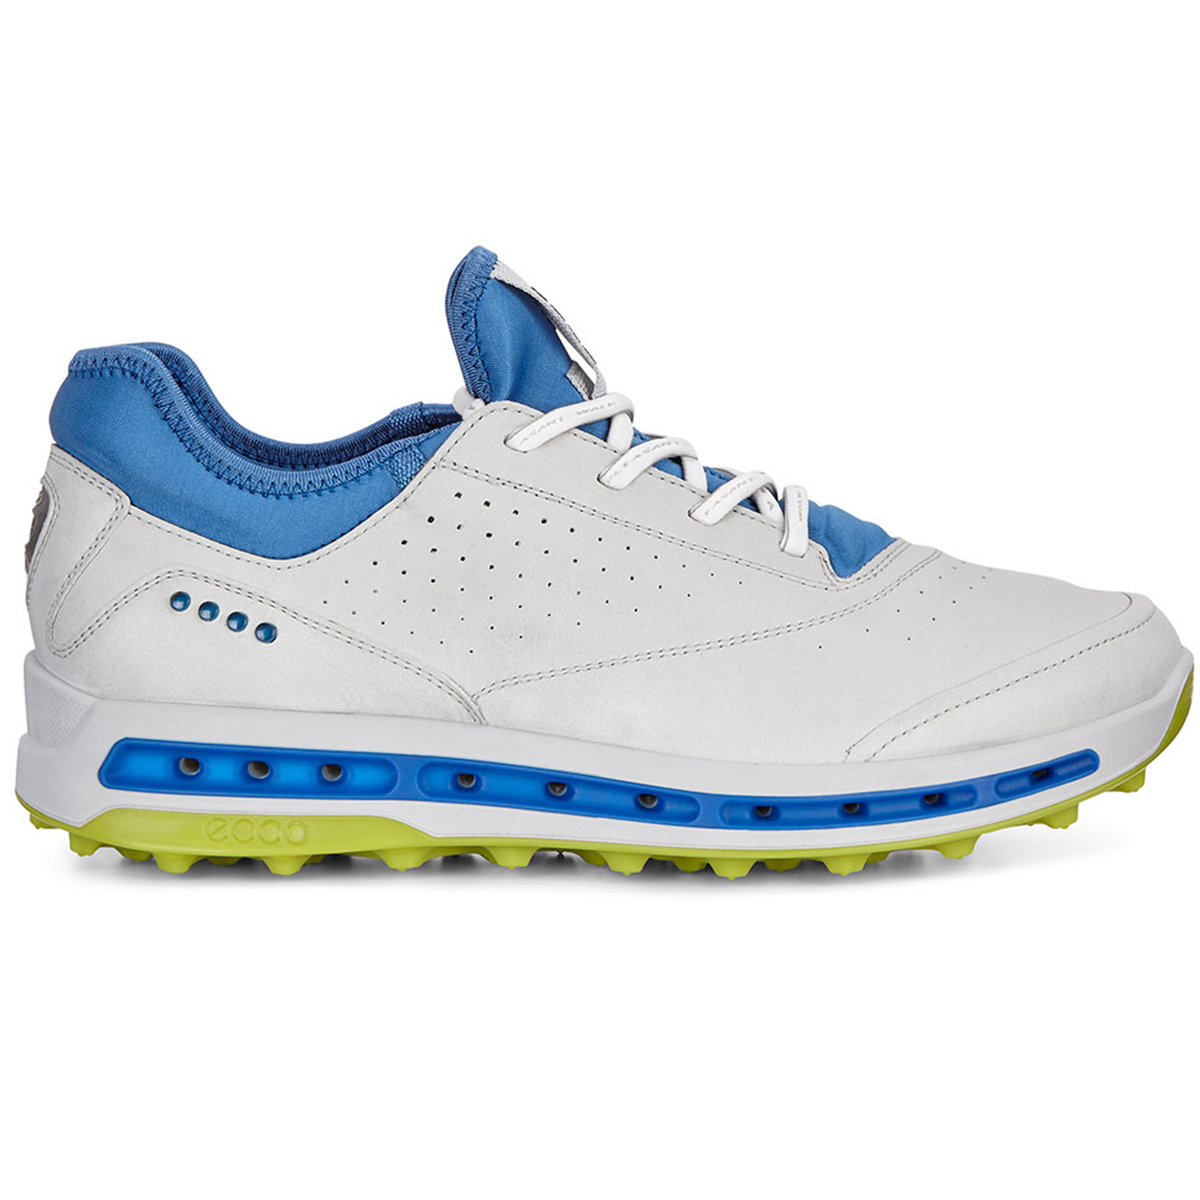 Ecco Cool Pro 18 Shoes from american golf